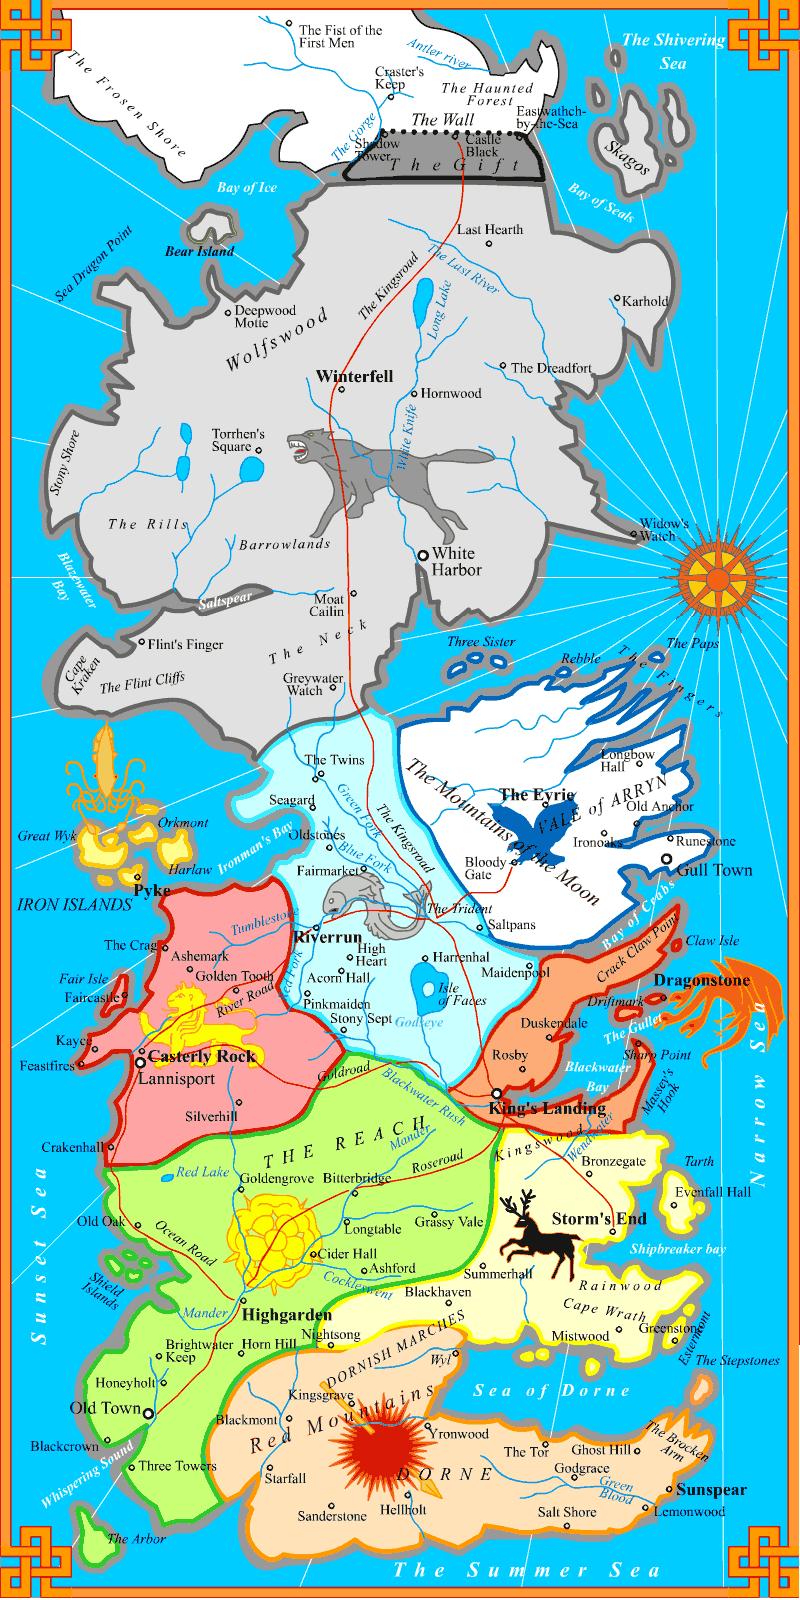 Aligonemobile The Best Maps To Help You Navigate The Game Of Thrones